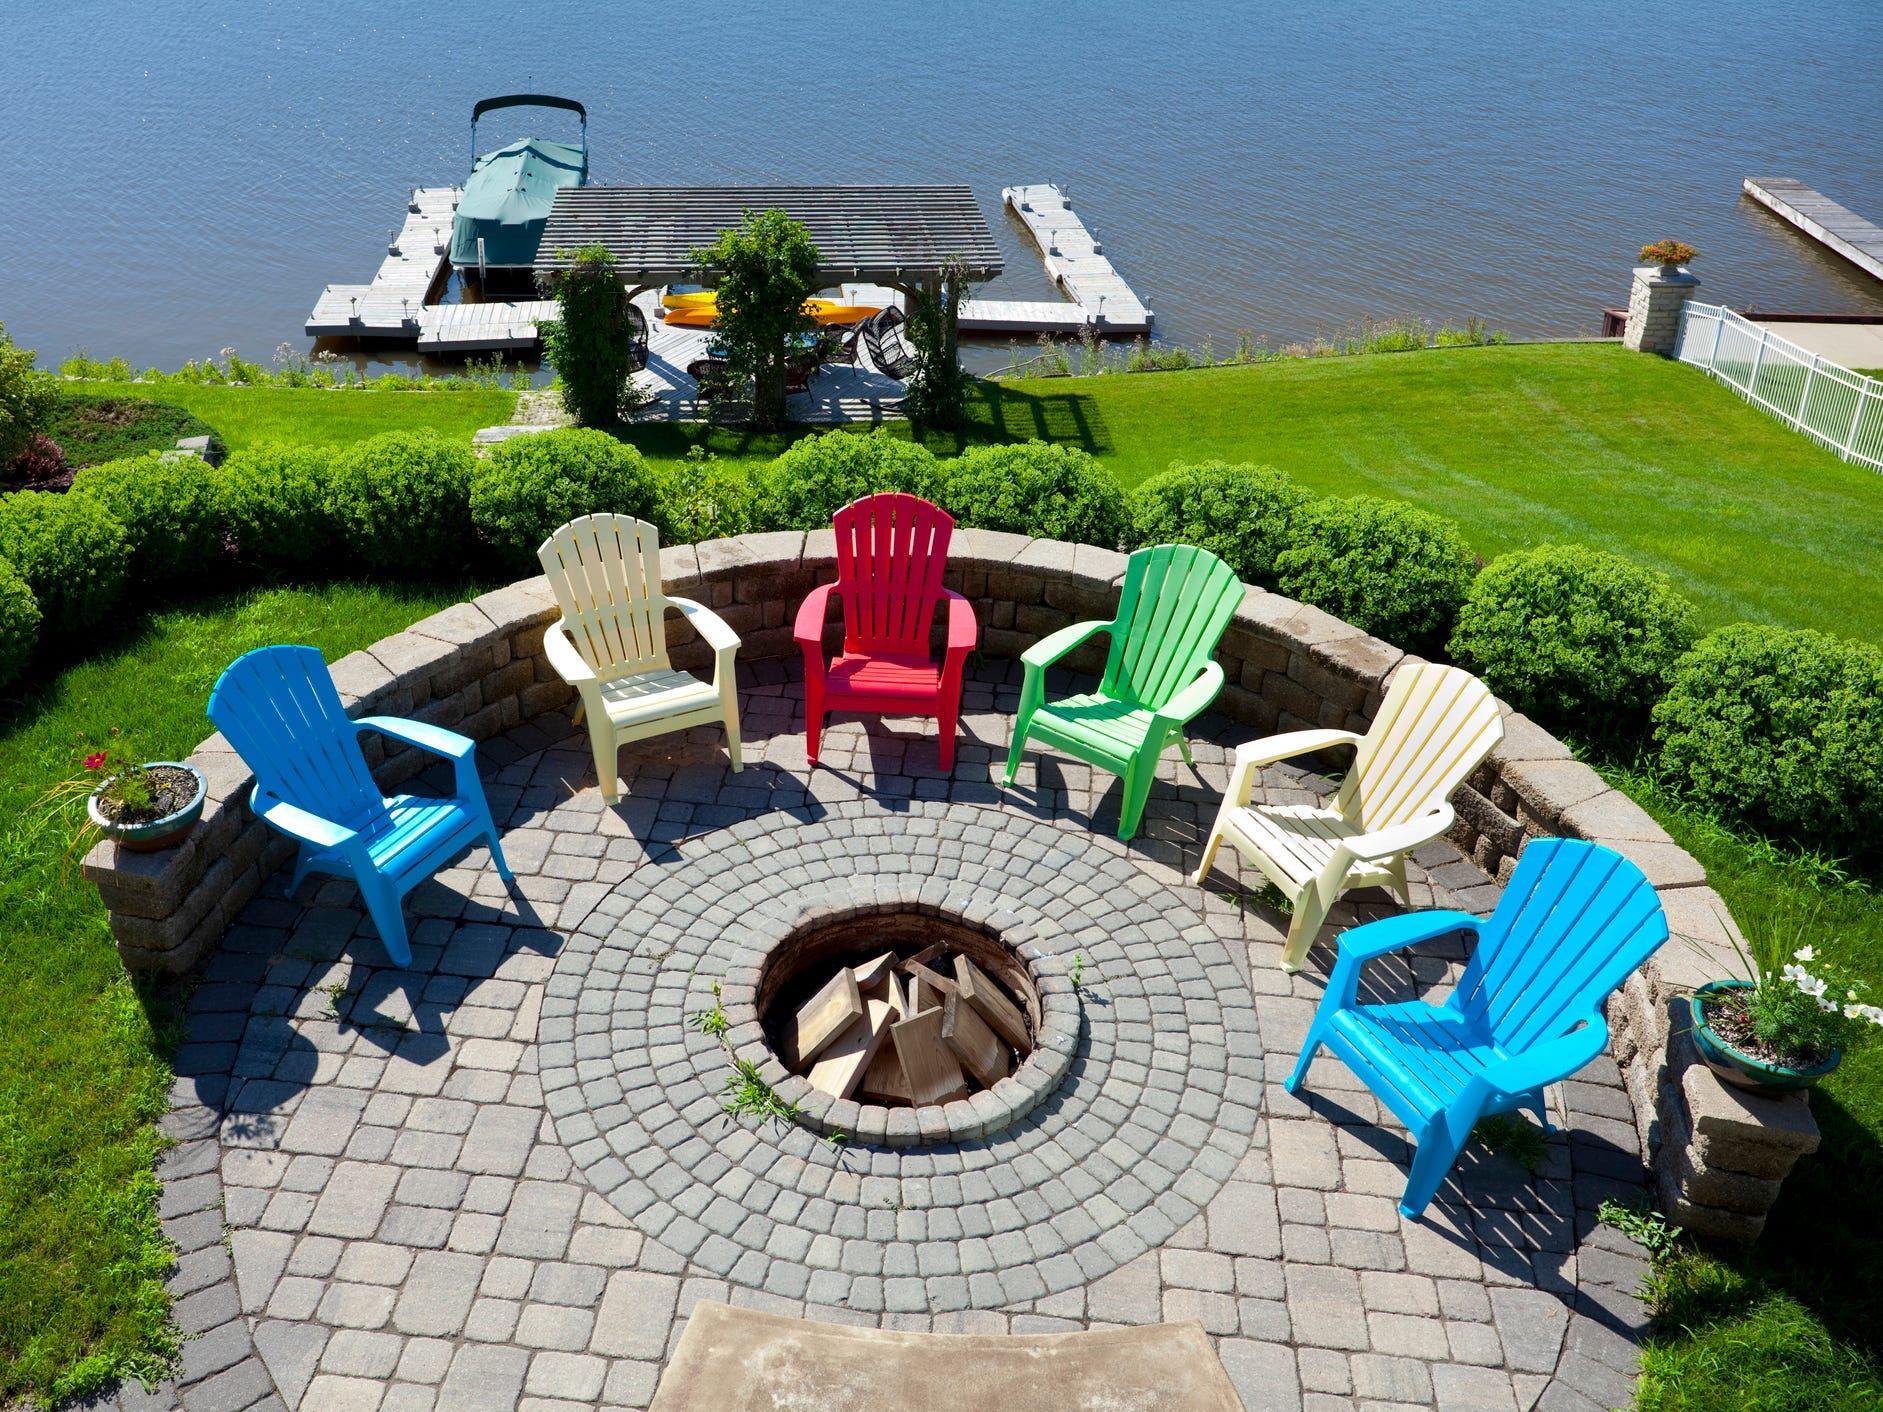 A fire pit set in a circular stone patio overlooking a dock